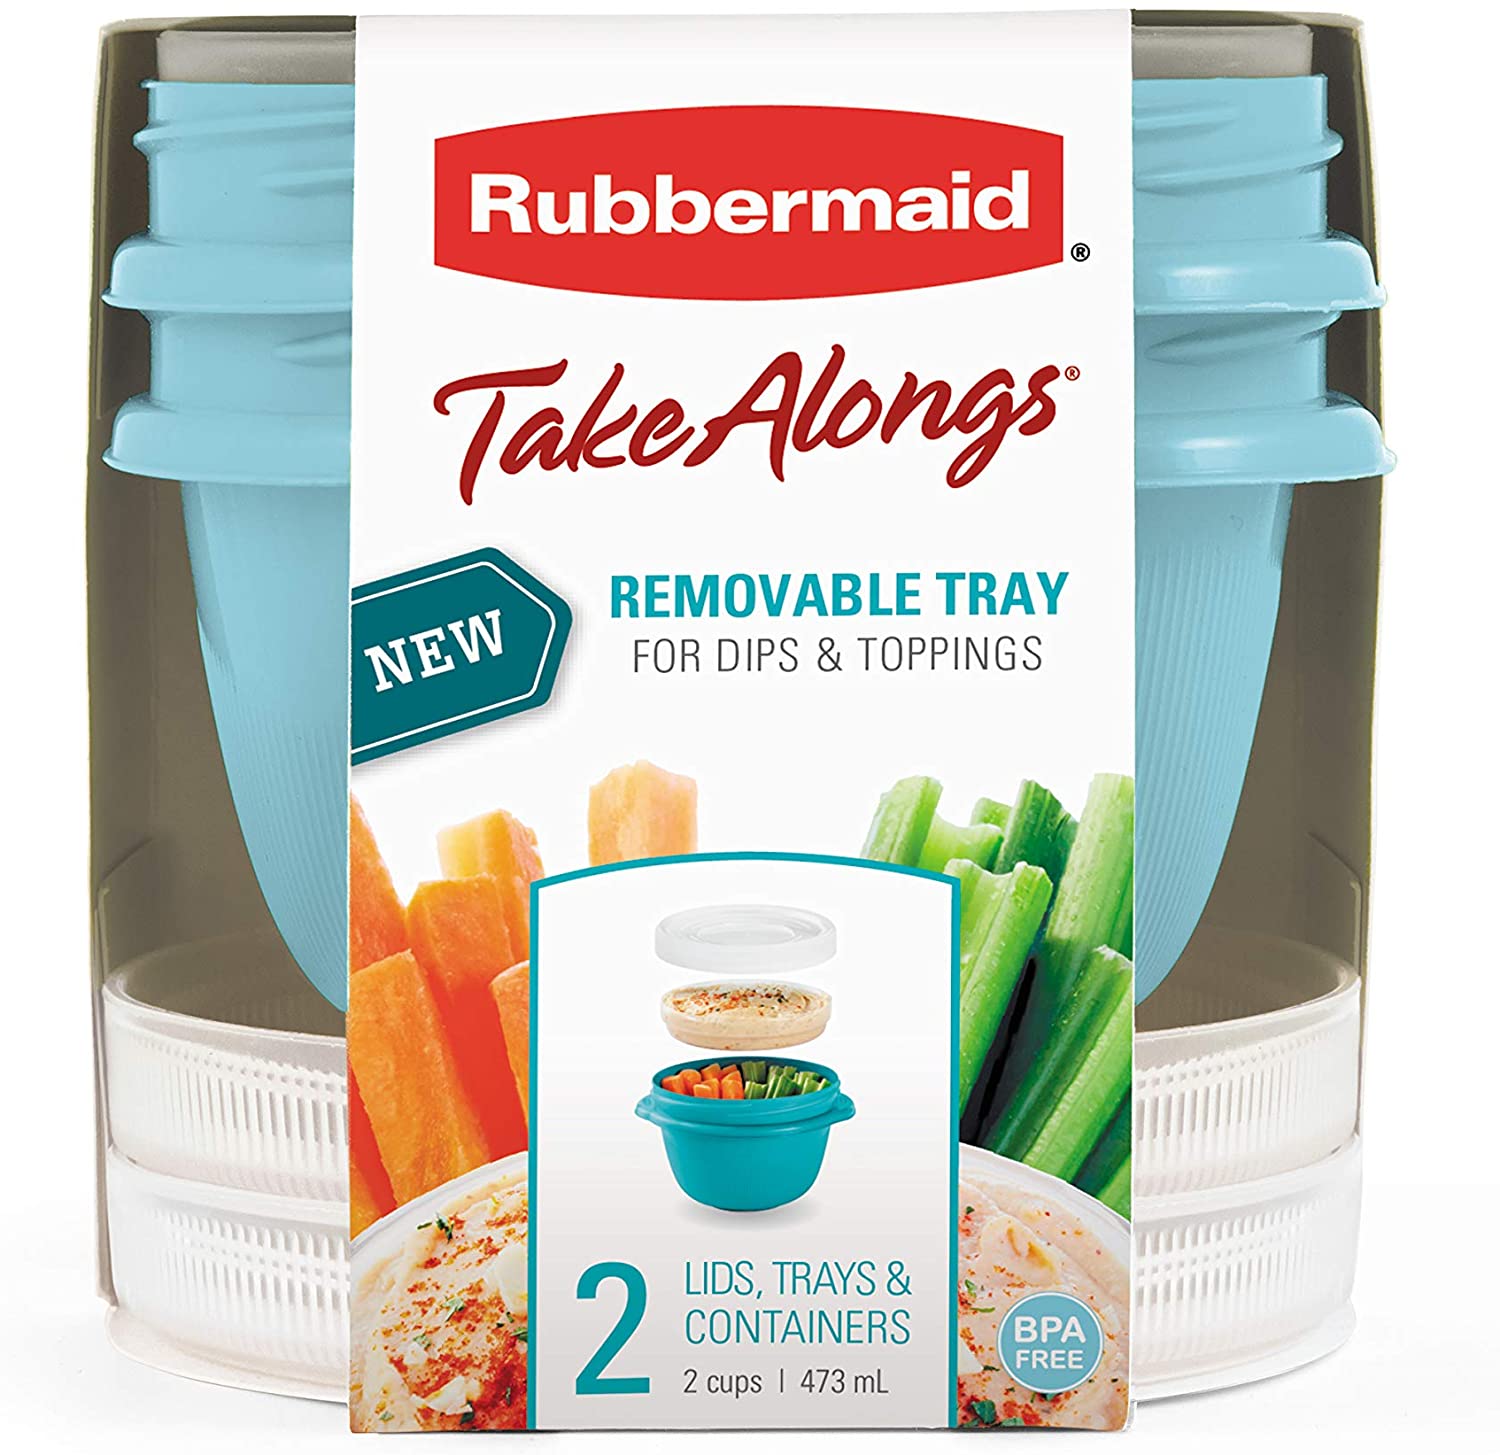 Rubbermaid Takealongs Medium Twist Seal With Insert Tray Food Storage Container, 473ml (2 Pack)
                Rubbermaid Takealongs Medium Twist Seal With Insert Tray Food Storage Container, 473ml (2 Pack)